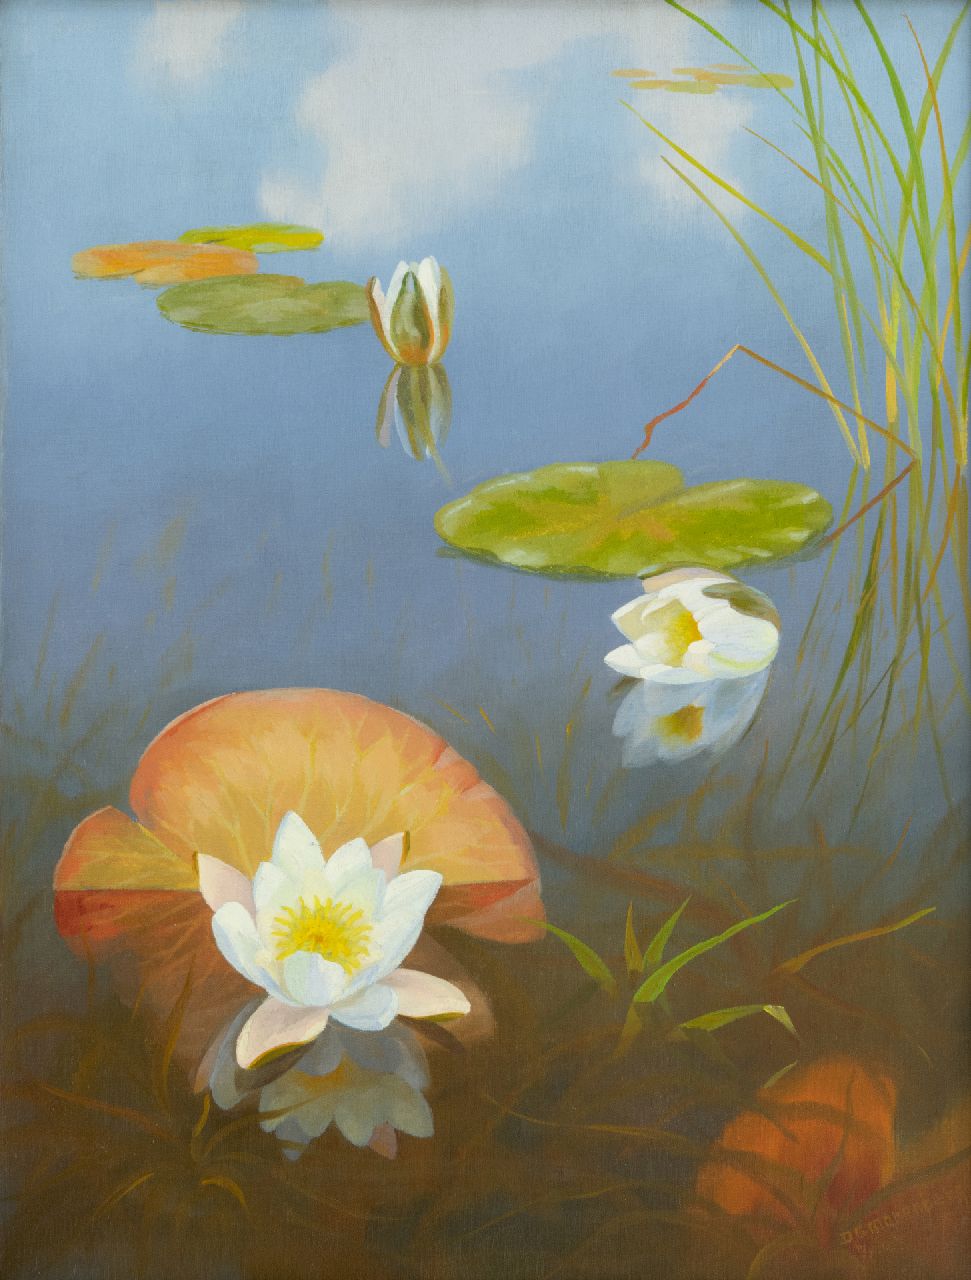 Smorenberg D.  | Dirk Smorenberg | Paintings offered for sale | Water lilies in the Loosdrechtse Plassen, oil on canvas 54.2 x 41.3 cm, signed l.r.